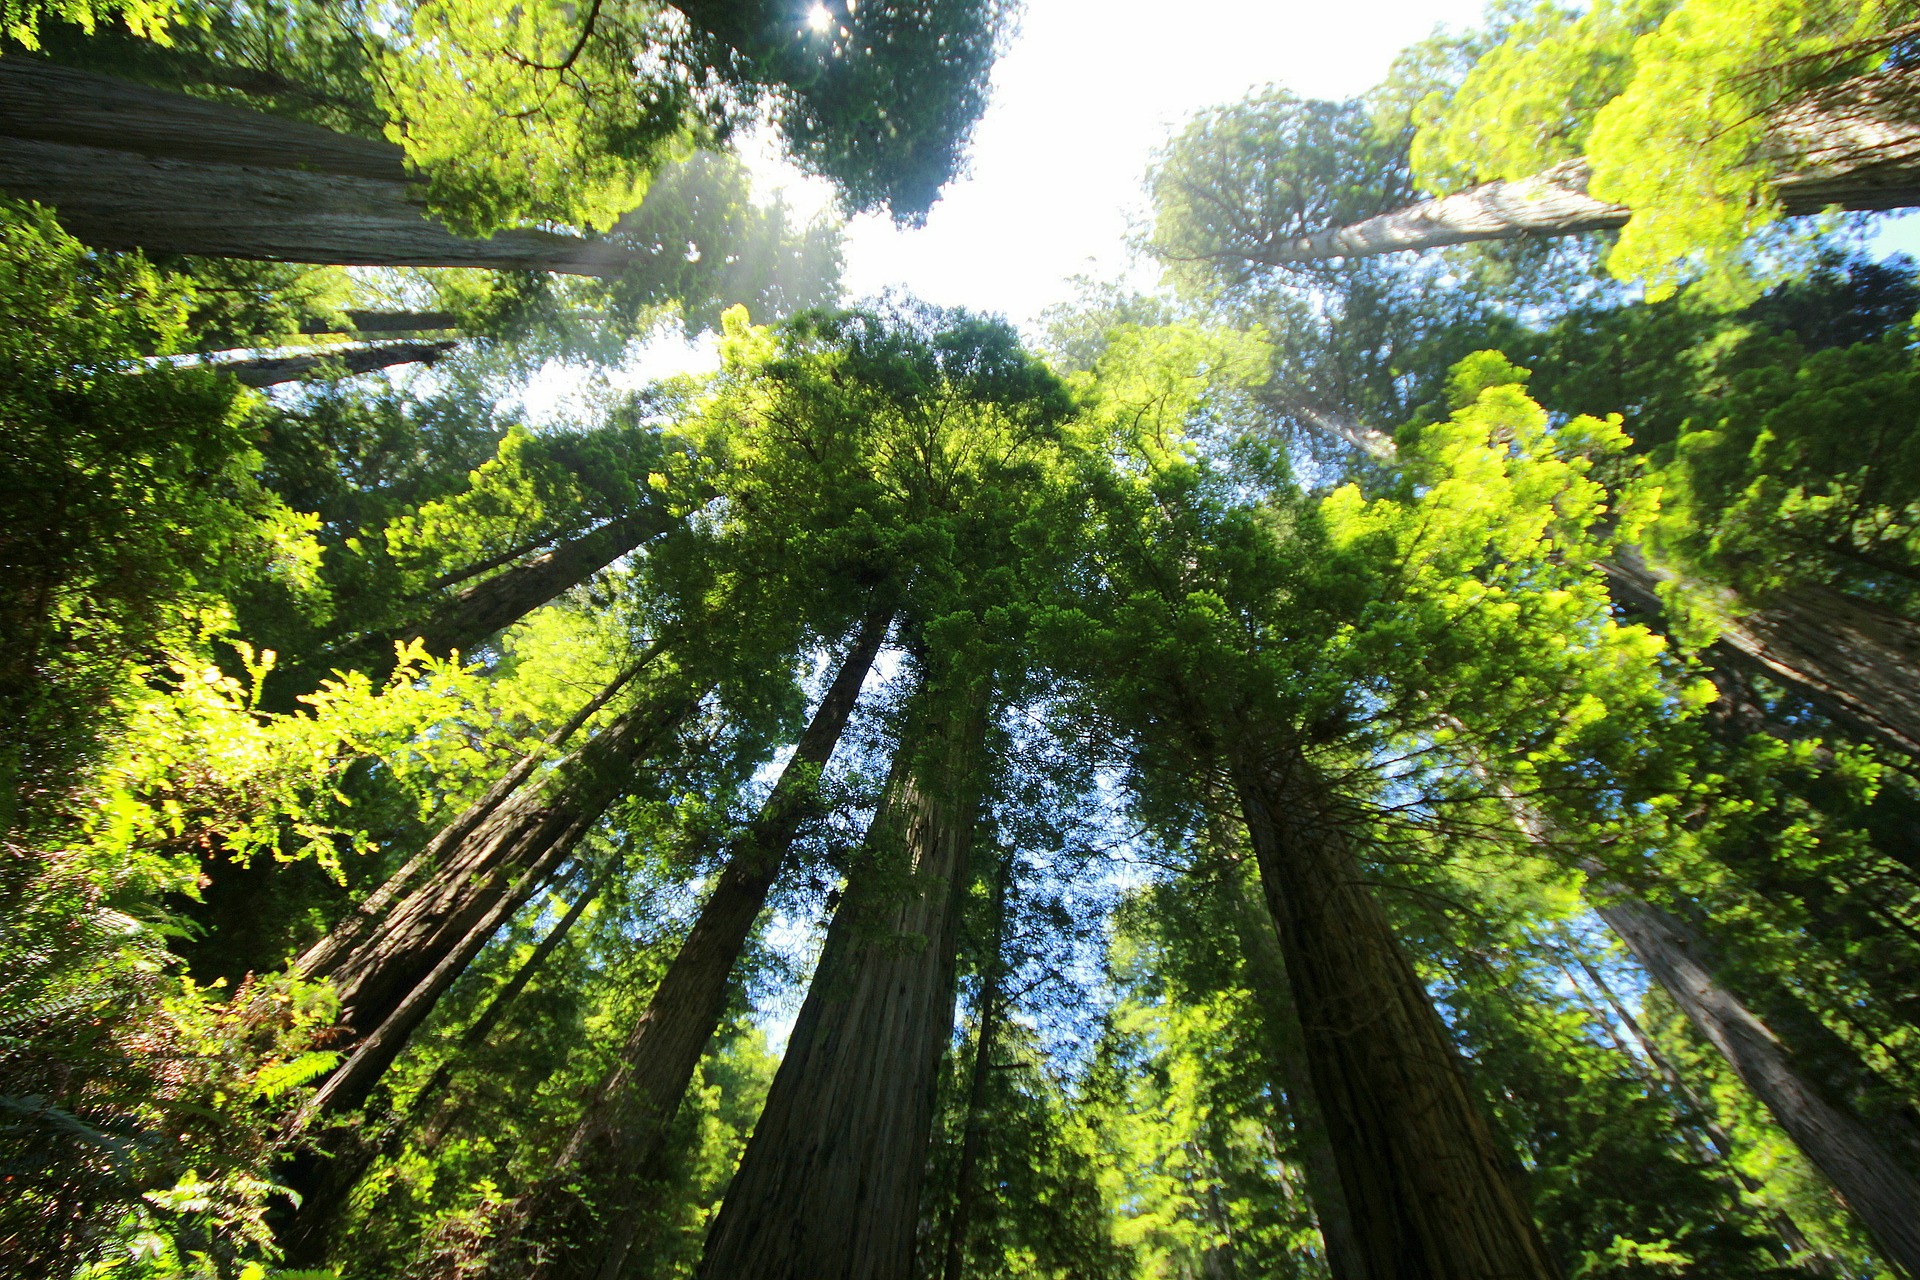 High trees to show qigong practice in the forest of giant redwoods in northern California